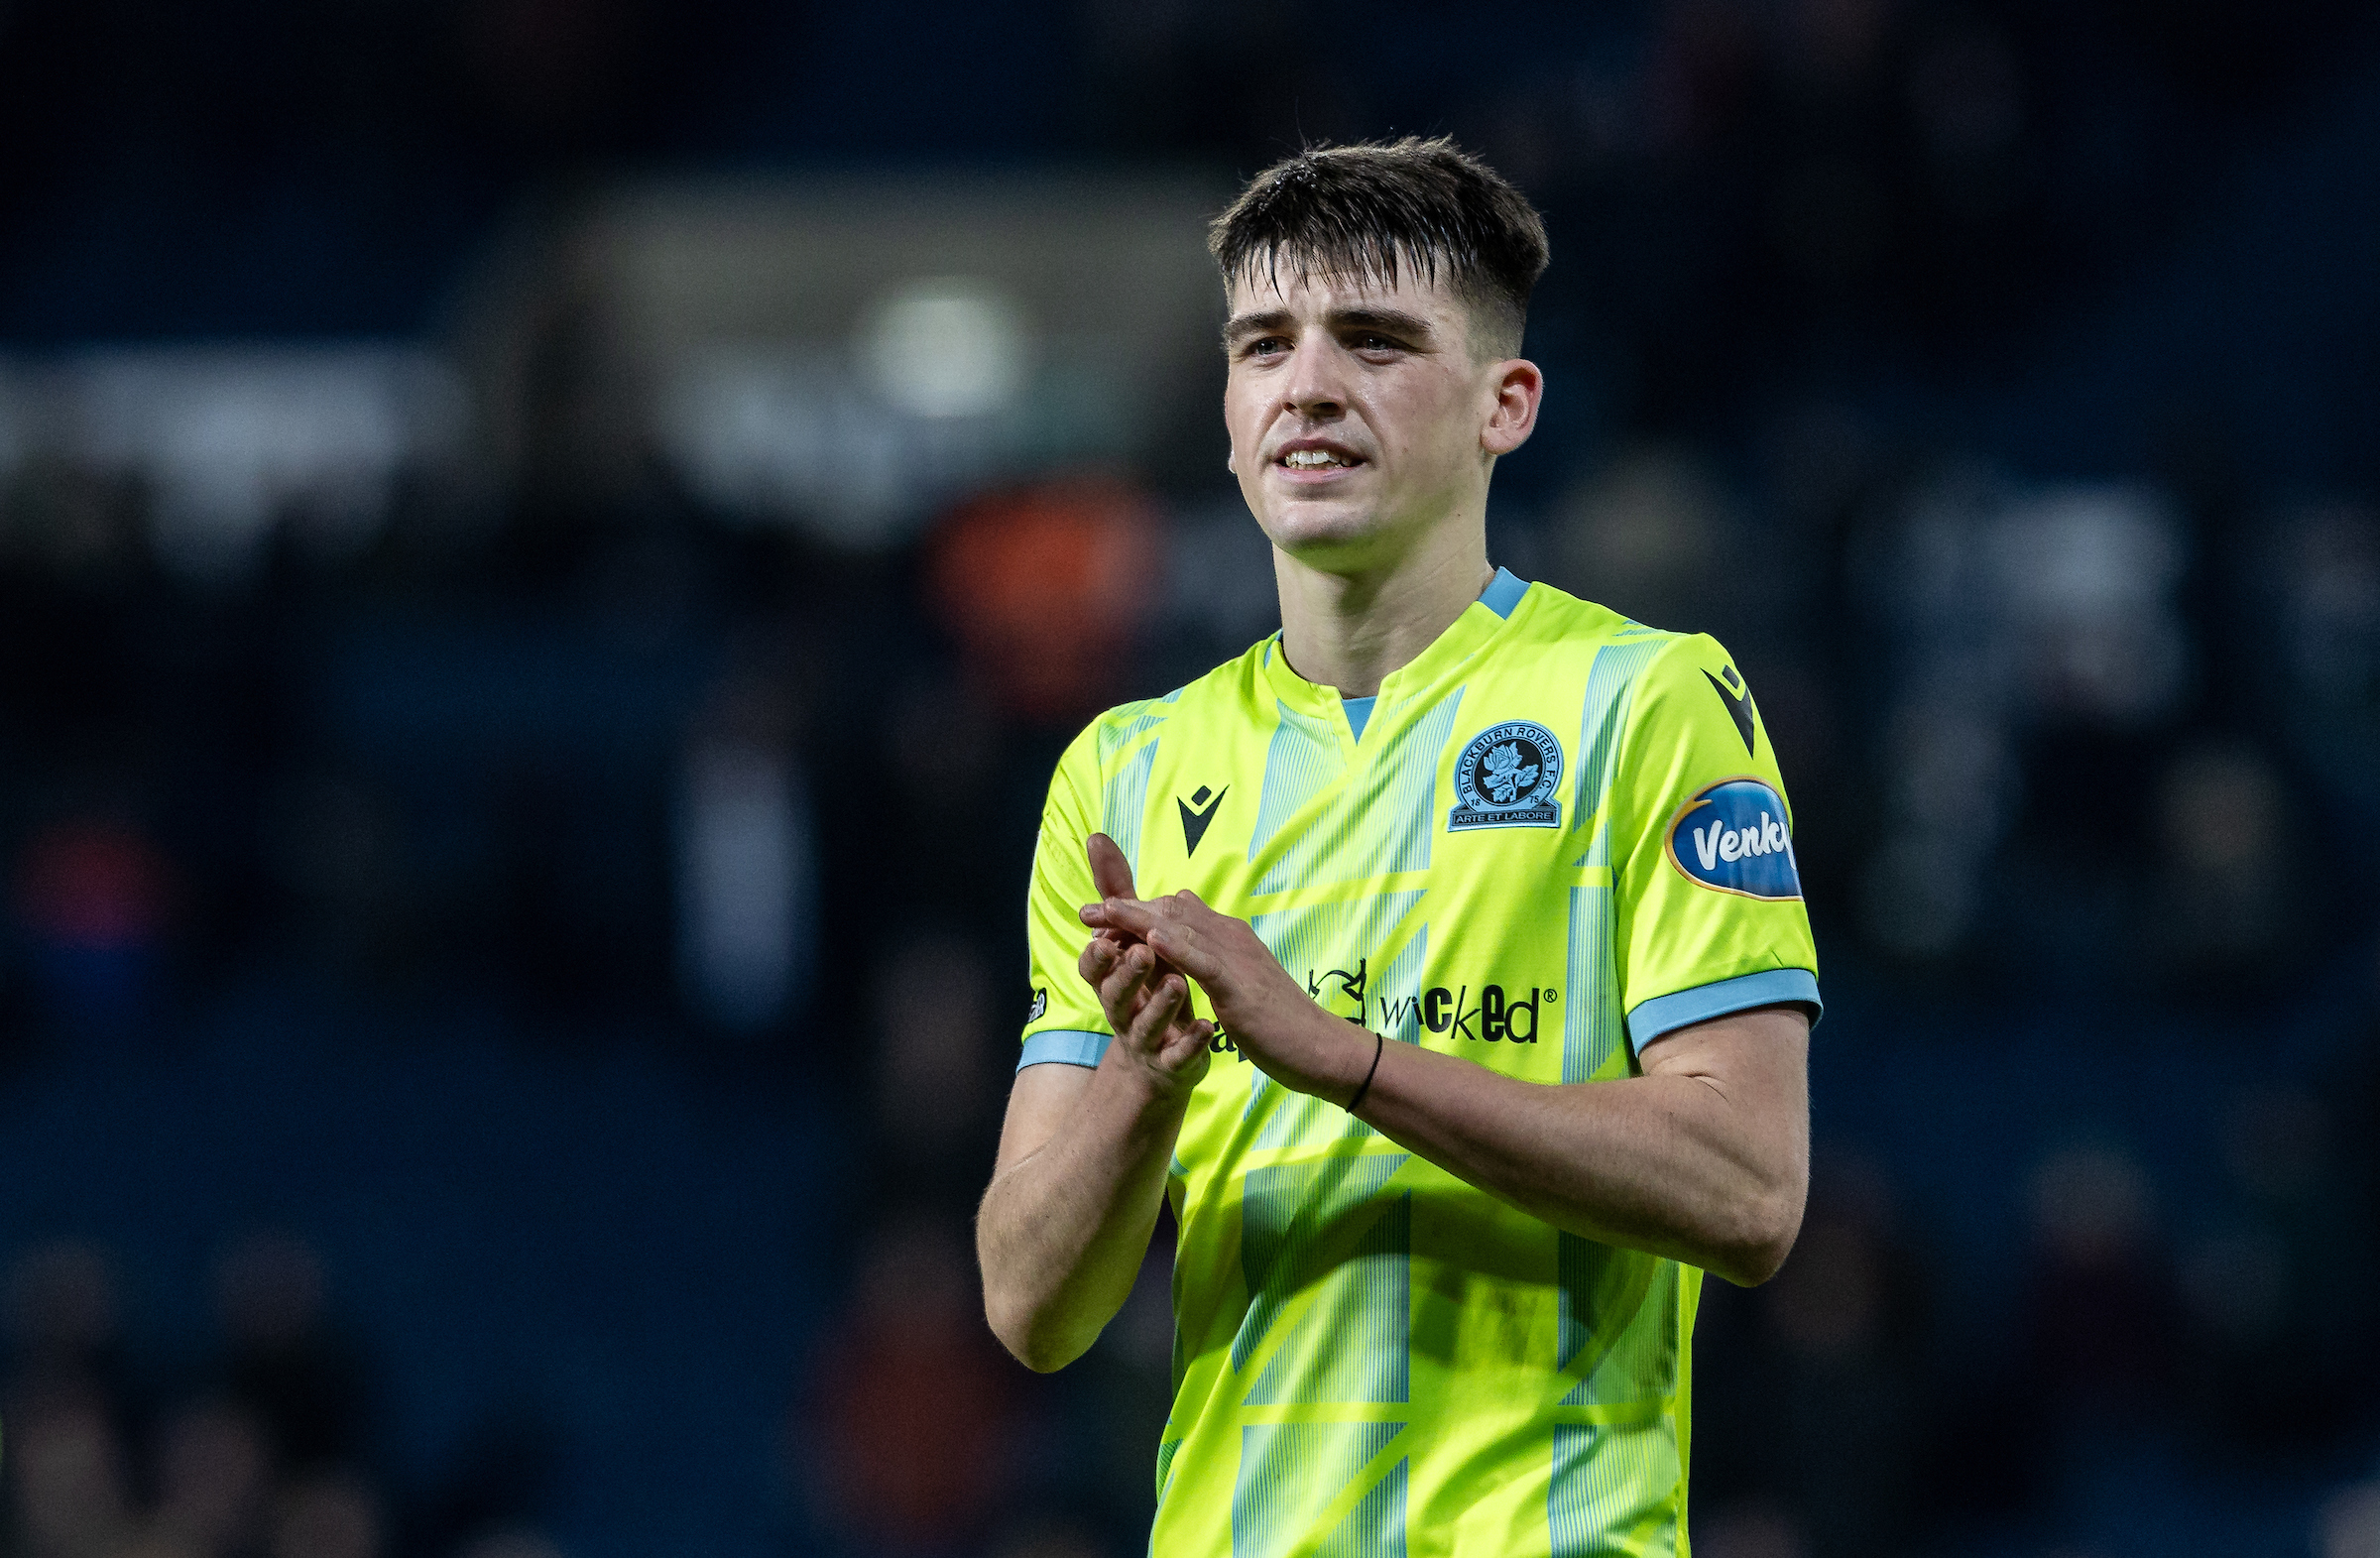 Blackburn Rovers loanee reflects on 'learning curve'